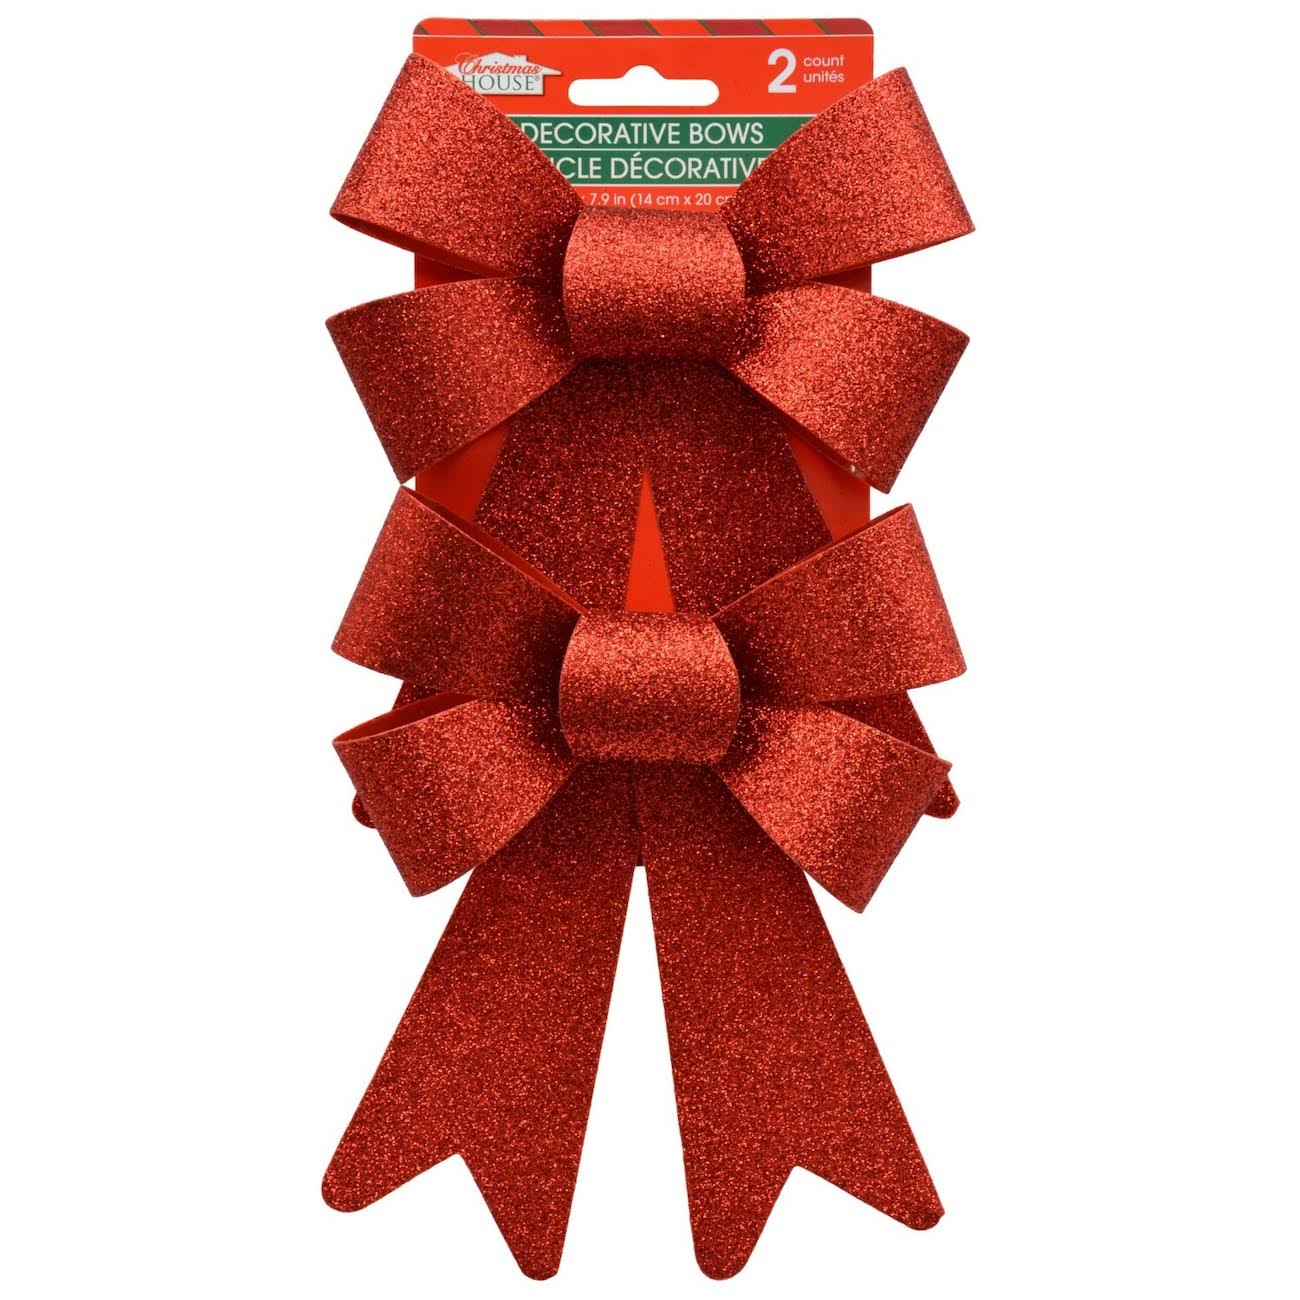 Christmas House Decorative Glittery Red Bows, 2-Ct. Packs